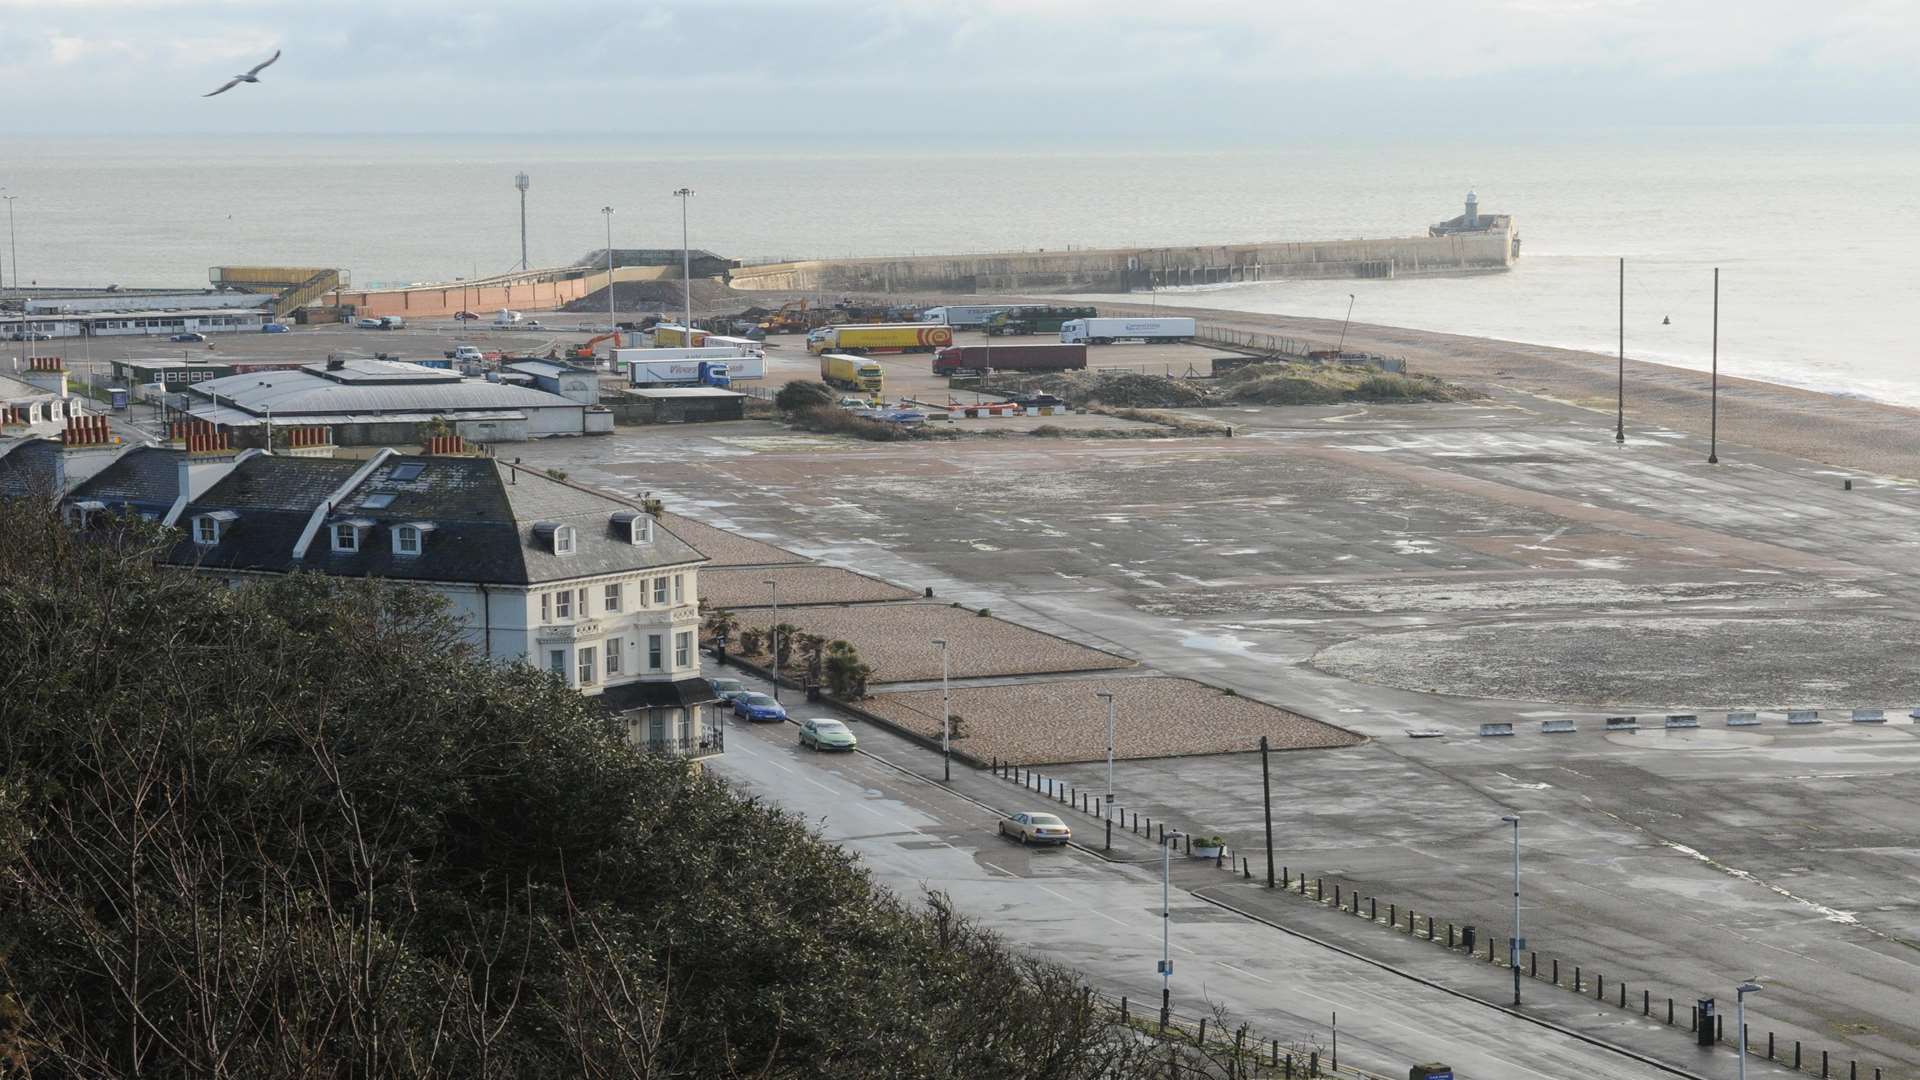 Folkestone's seafront remains a derelict slab of concrete at the moment. Picture: Wayne McCabe